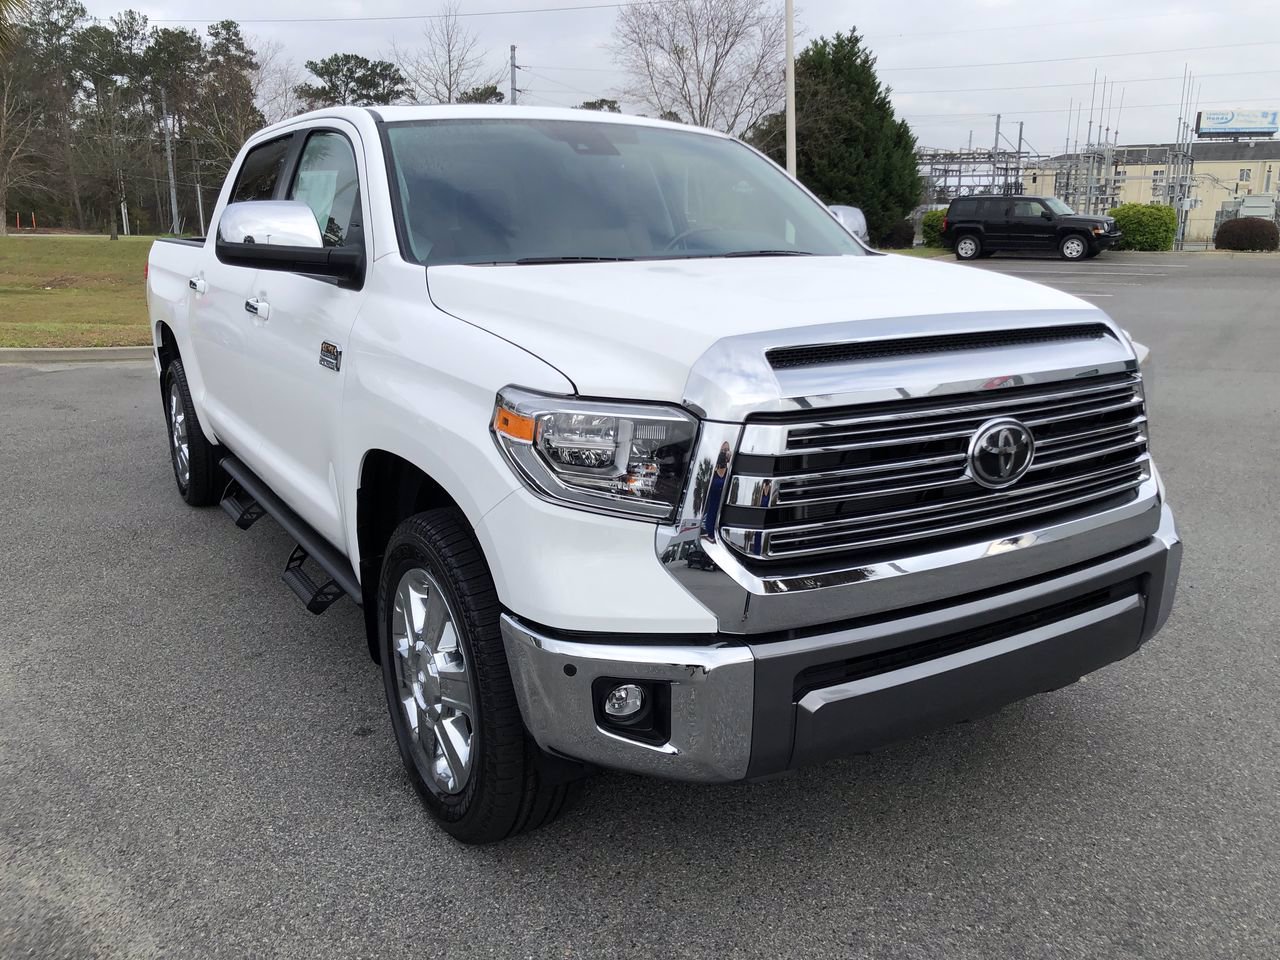 New 2020 Toyota Tundra 2WD 1794 Edition CrewMax Crew Cab Pickup in